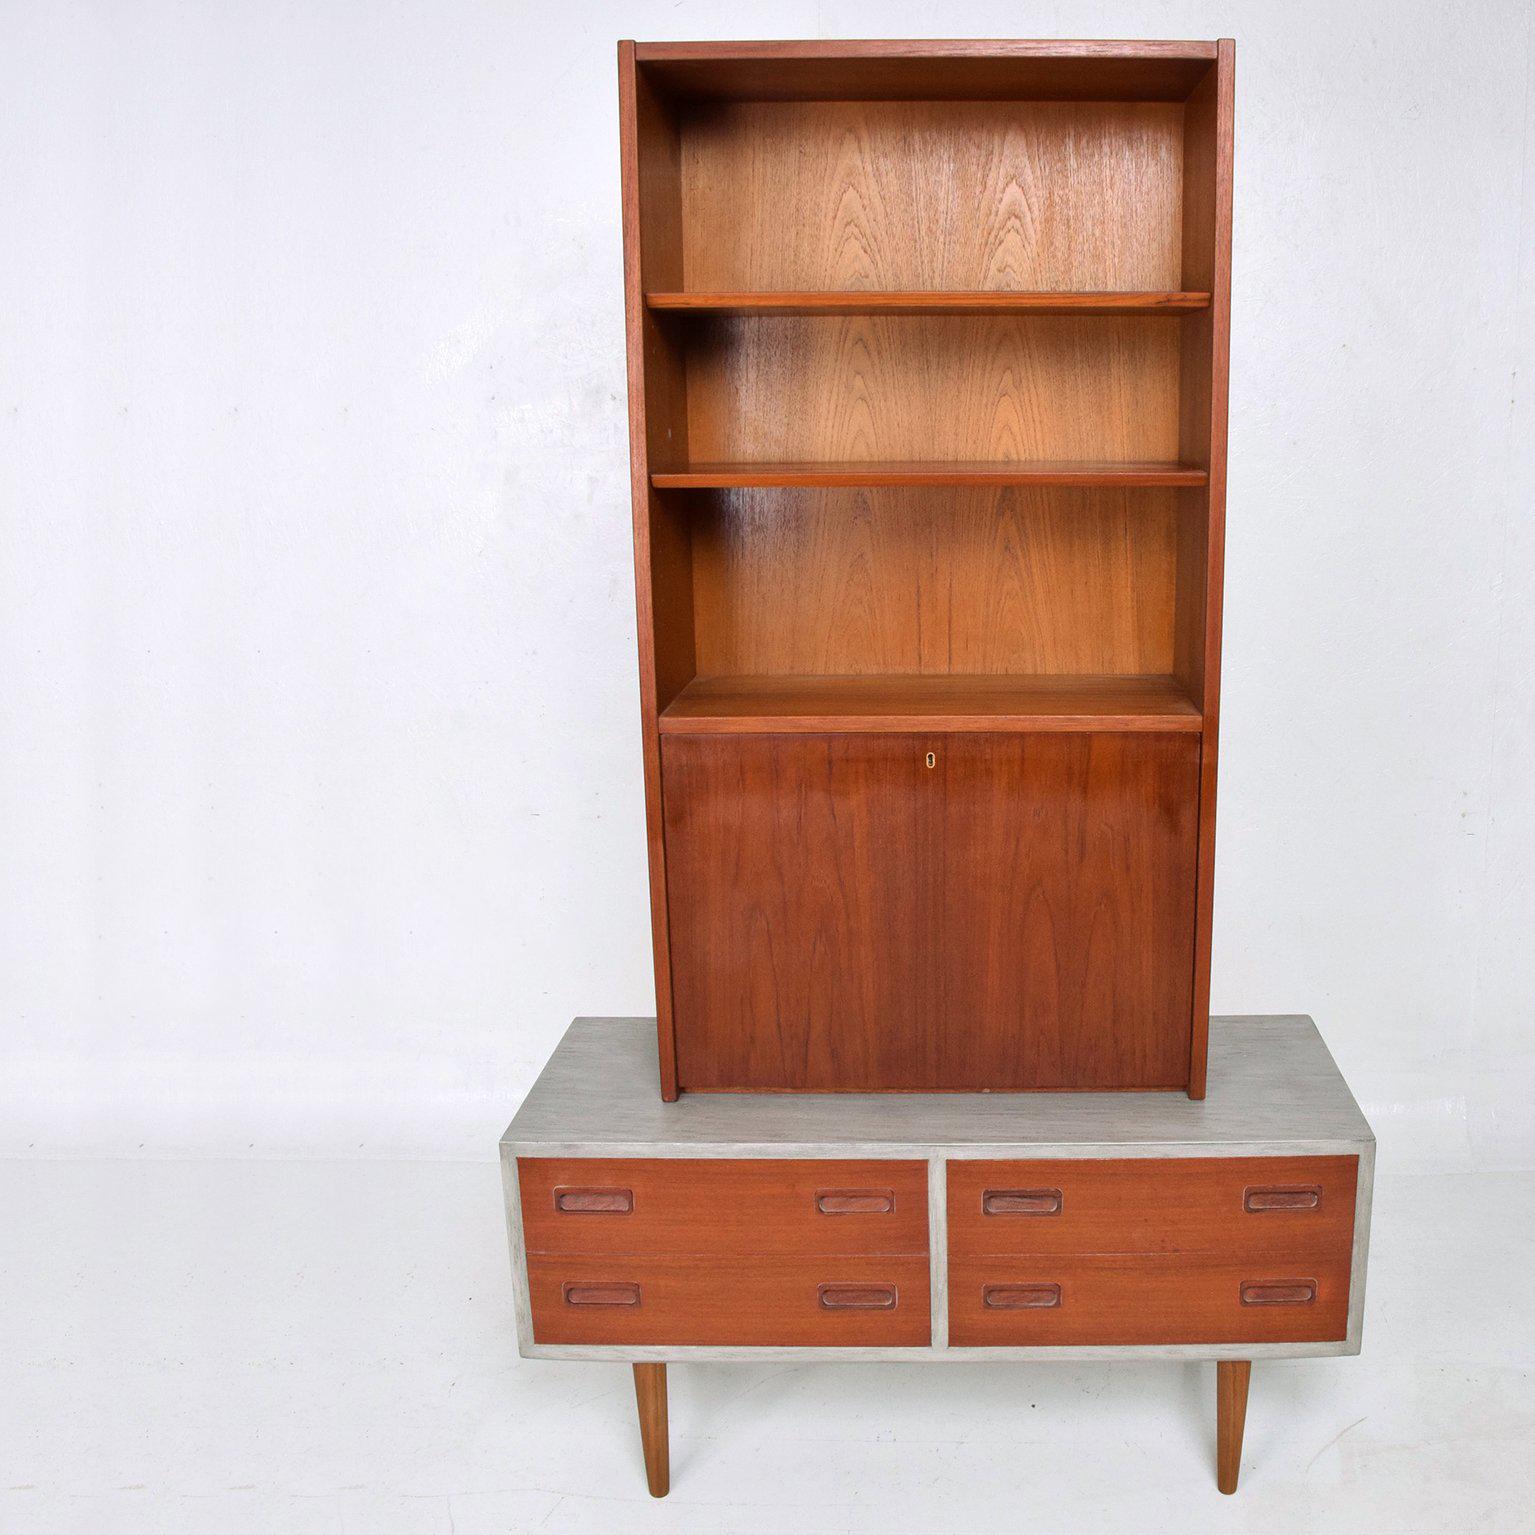 For your consideration a Danish modern cabinet with four pull-out drawers and hutch.
The cabinet is two-tone, teak with grey cerused finish.
Cabinet mounted in solid teak peg legs.
Retains Danish control label in one side of the drawer.
All